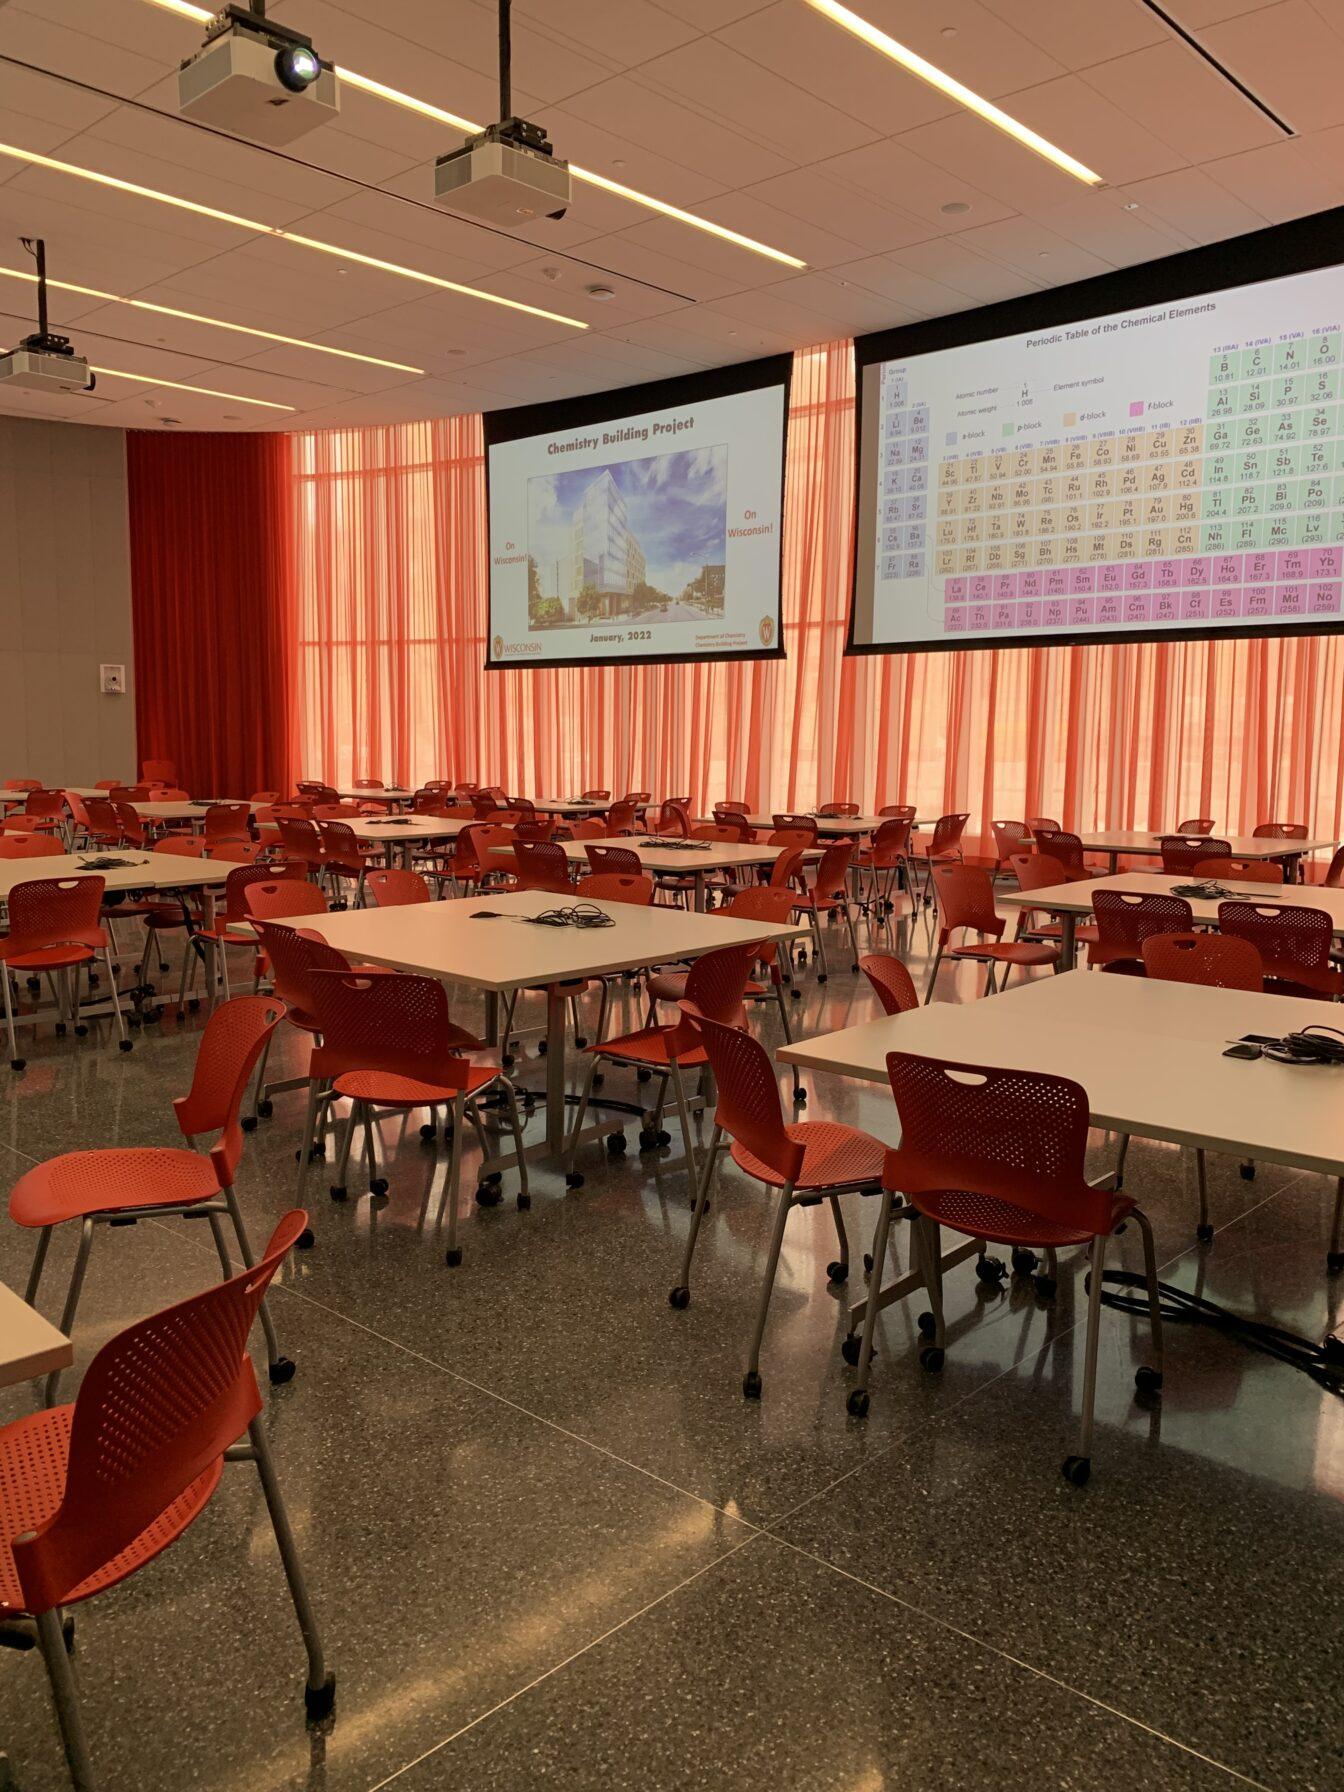 The new Learning Studio, an active learning classroom